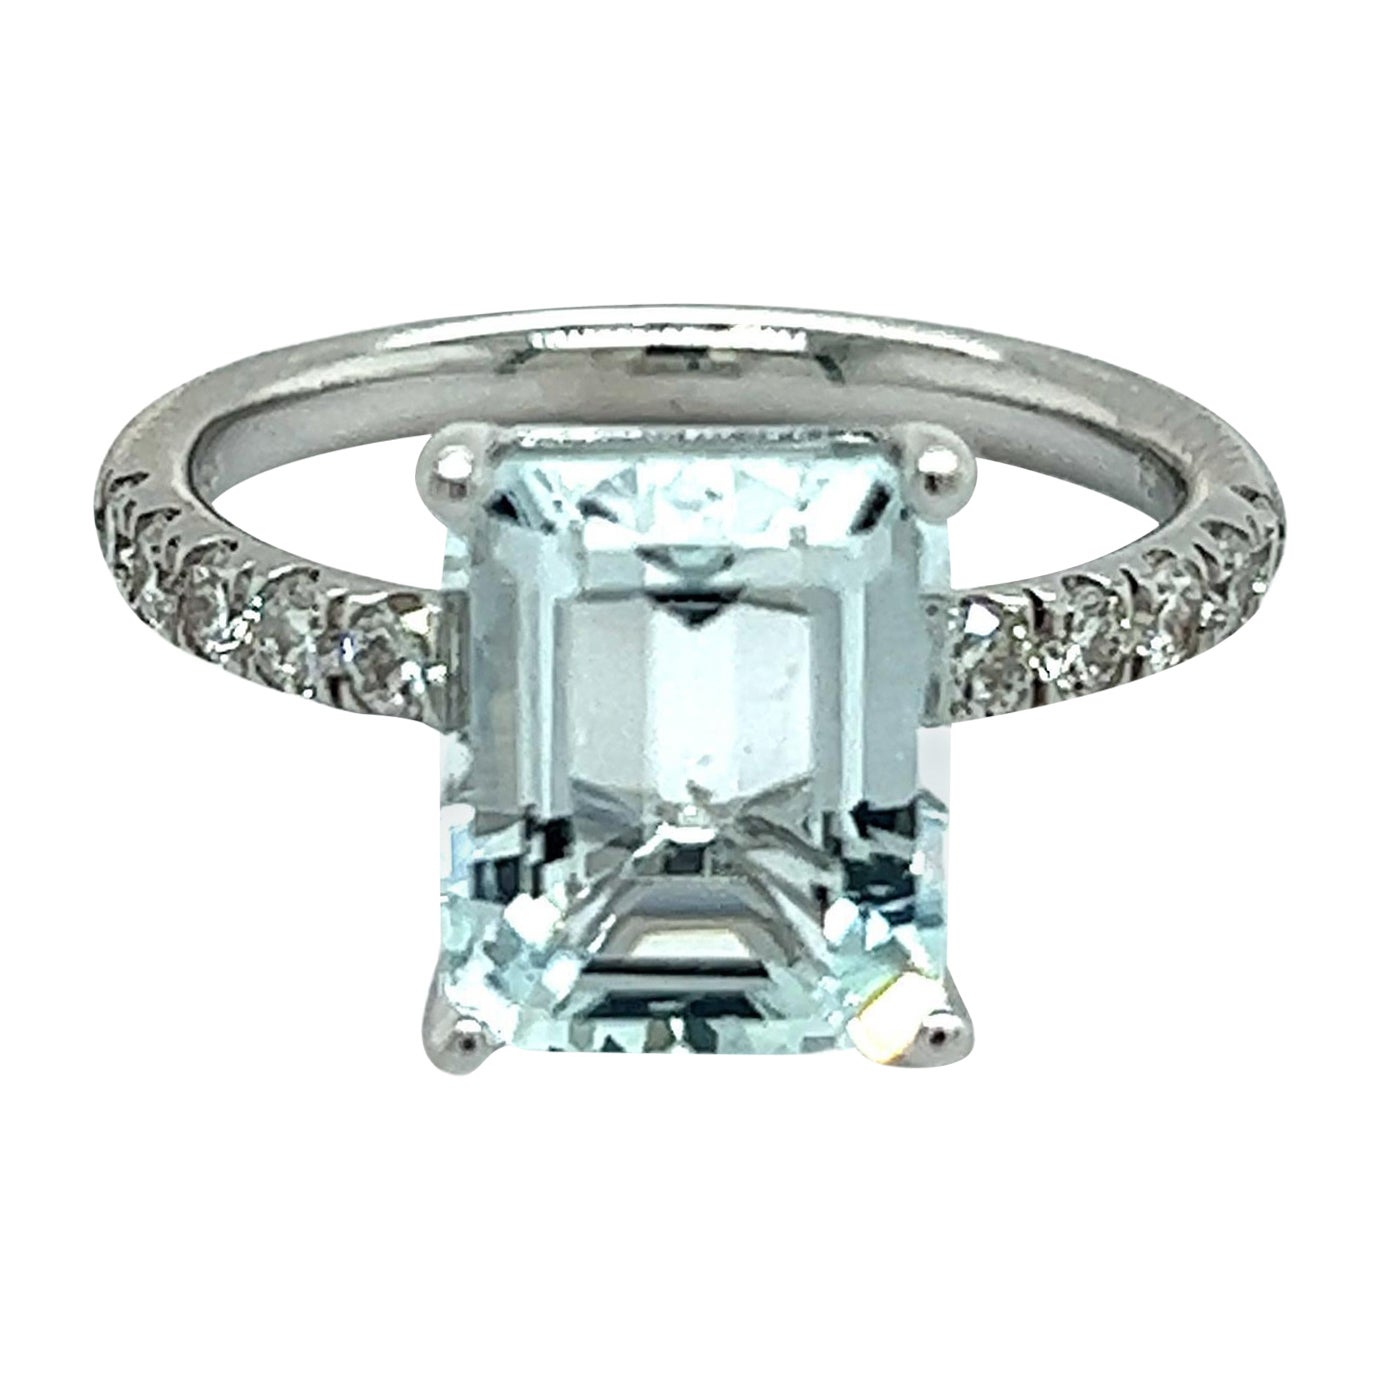 Natural Aquamarine Diamond Ring 14k W Gold 3.29 TCW Certified For Sale